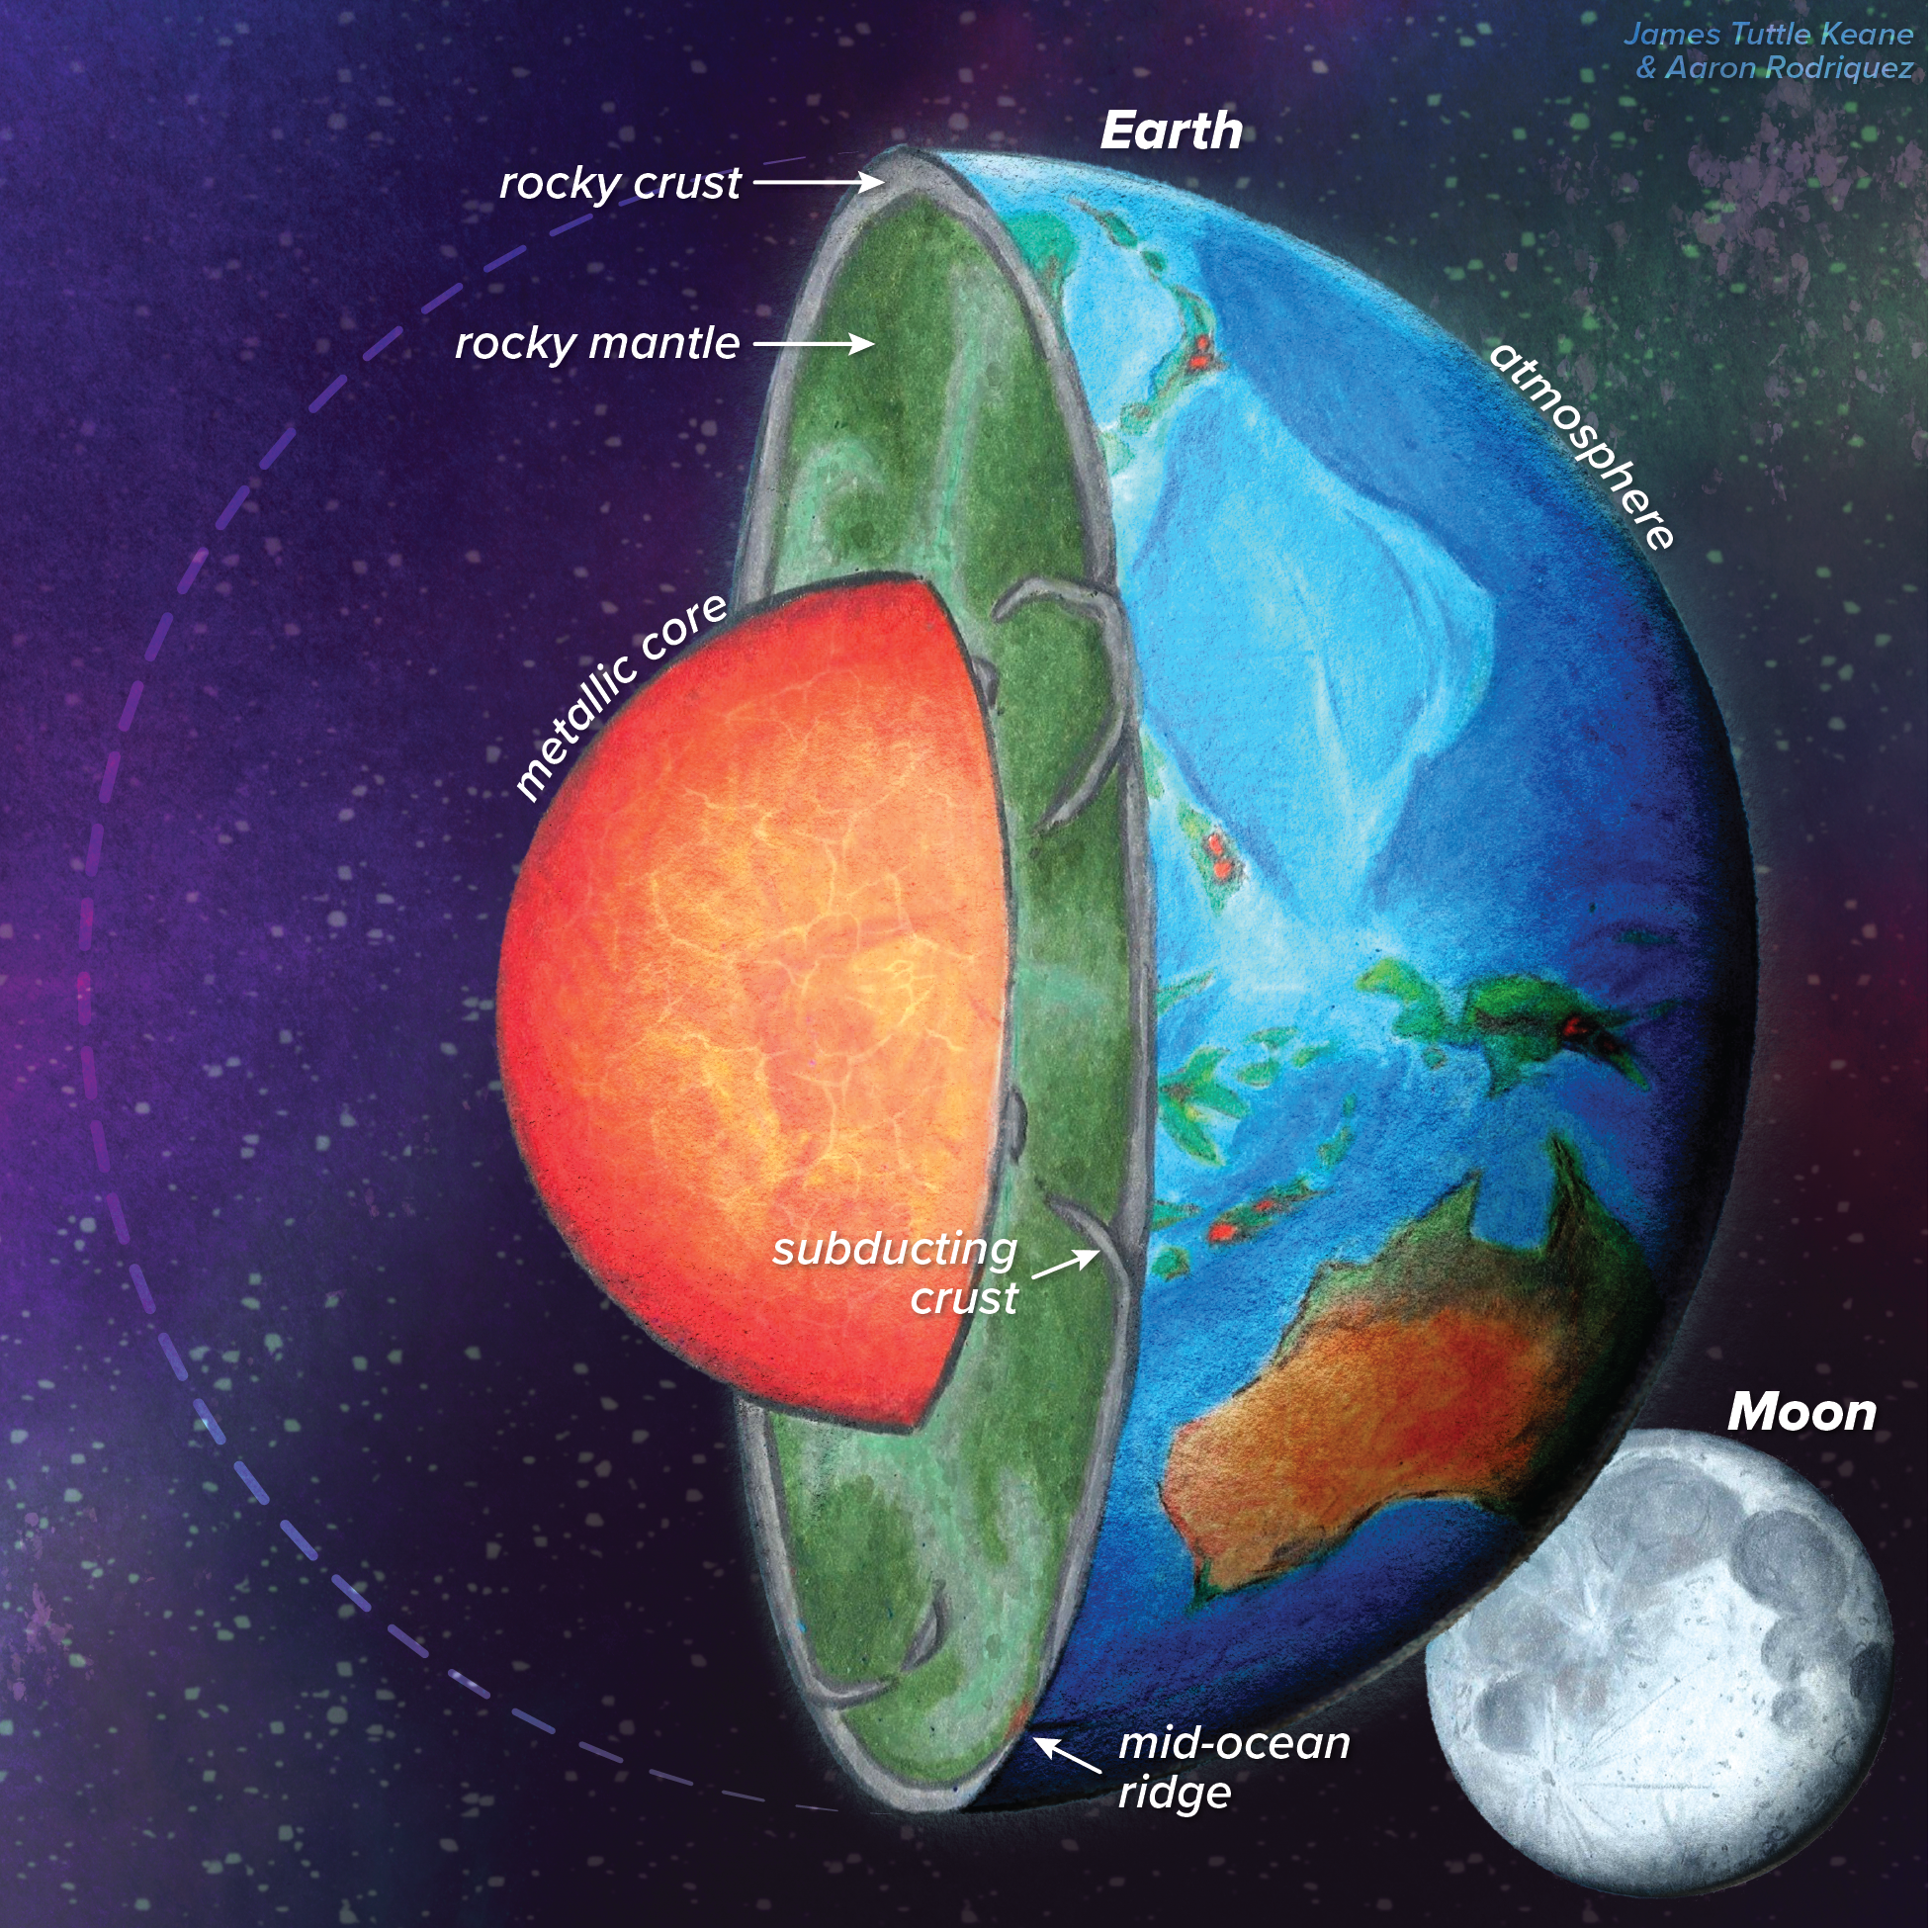 Cross section of Earth showing the metalic core surrounded by the rocky mantle and crust. Moon is shown in background.